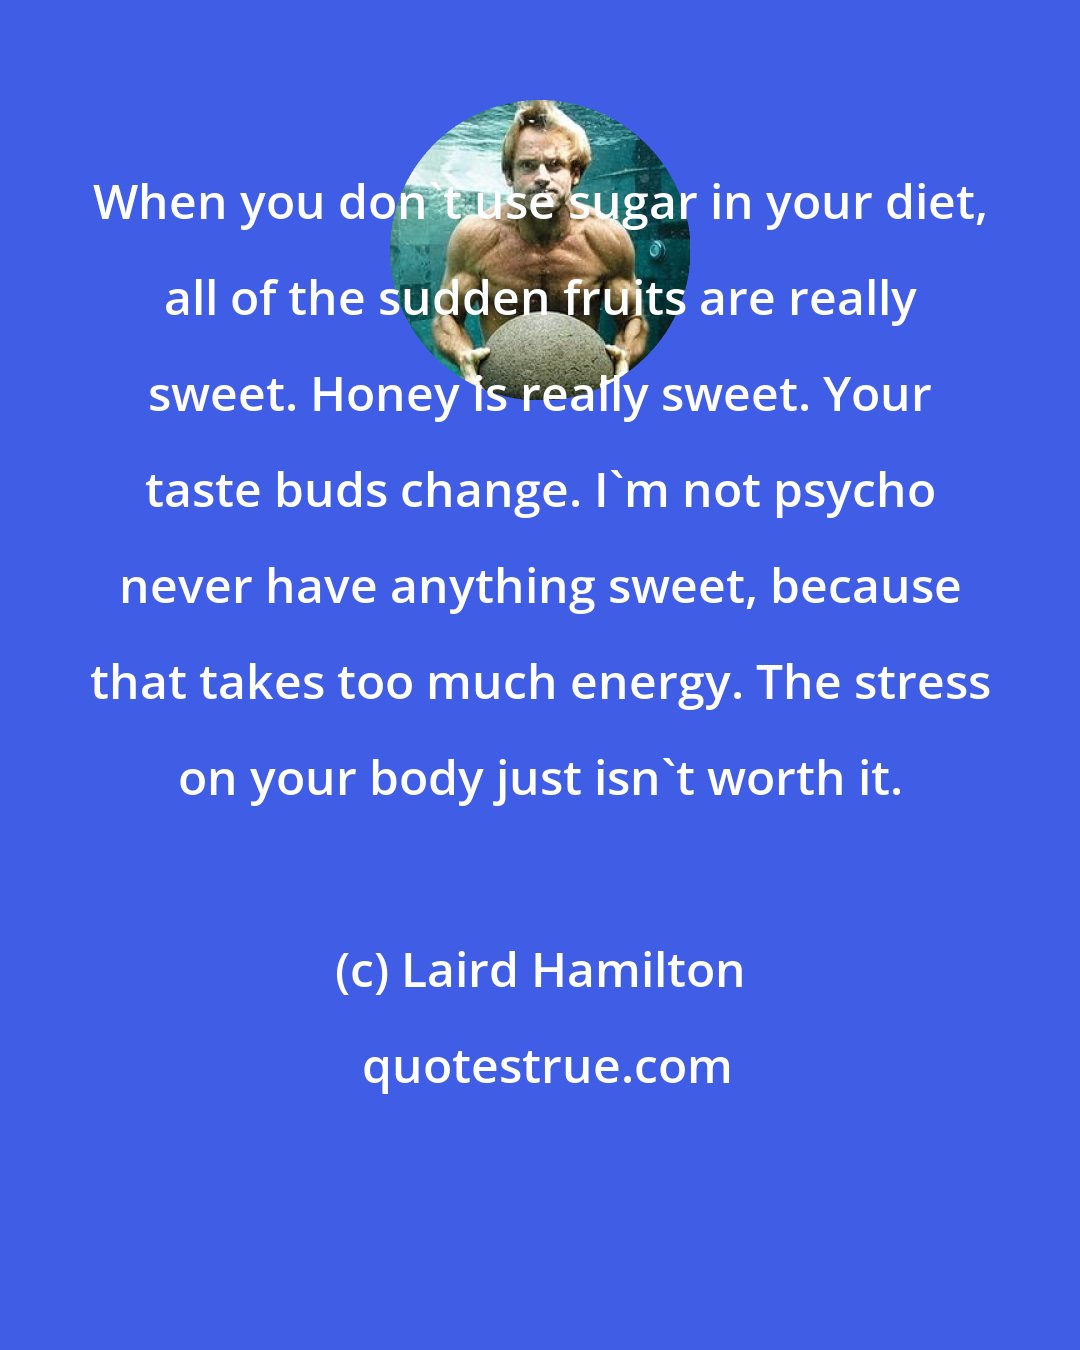 Laird Hamilton: When you don't use sugar in your diet, all of the sudden fruits are really sweet. Honey is really sweet. Your taste buds change. I'm not psycho never have anything sweet, because that takes too much energy. The stress on your body just isn't worth it.